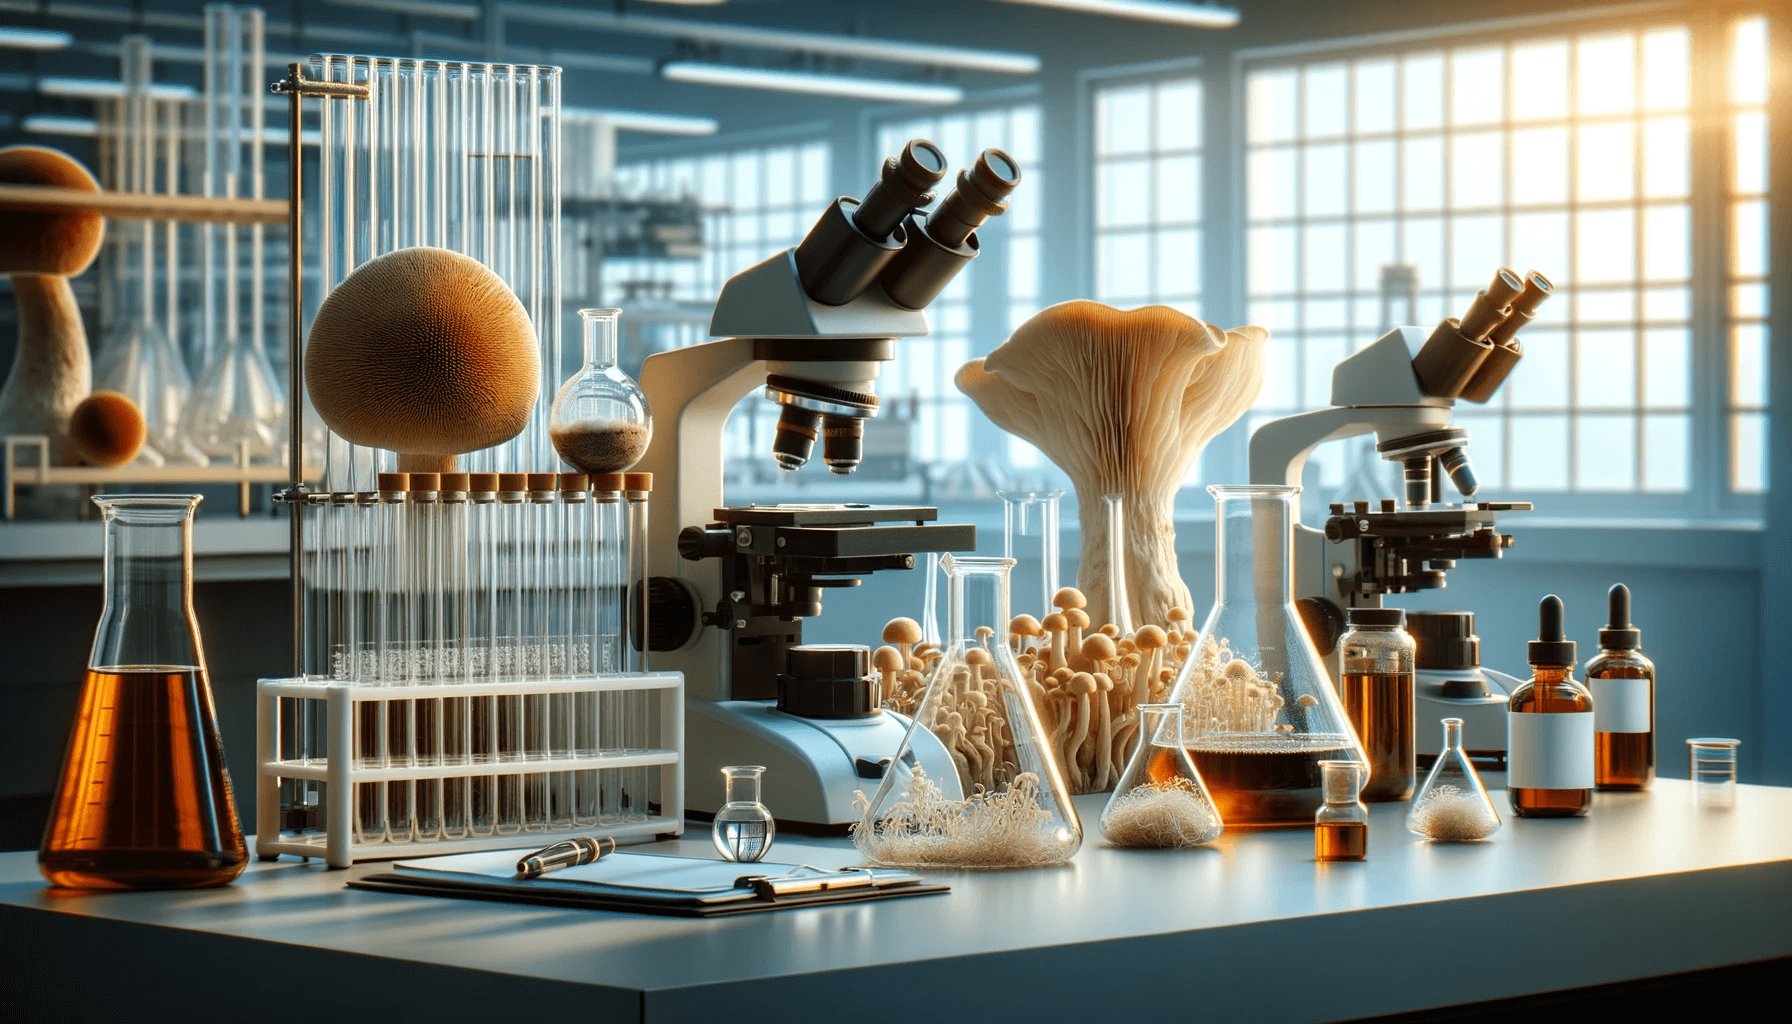 A laboratory setting with scientific equipment showcasing the process of extracting Lion's Mane Mushroom Extract. The scene includes beakers, flasks, and other scientific apparatus.